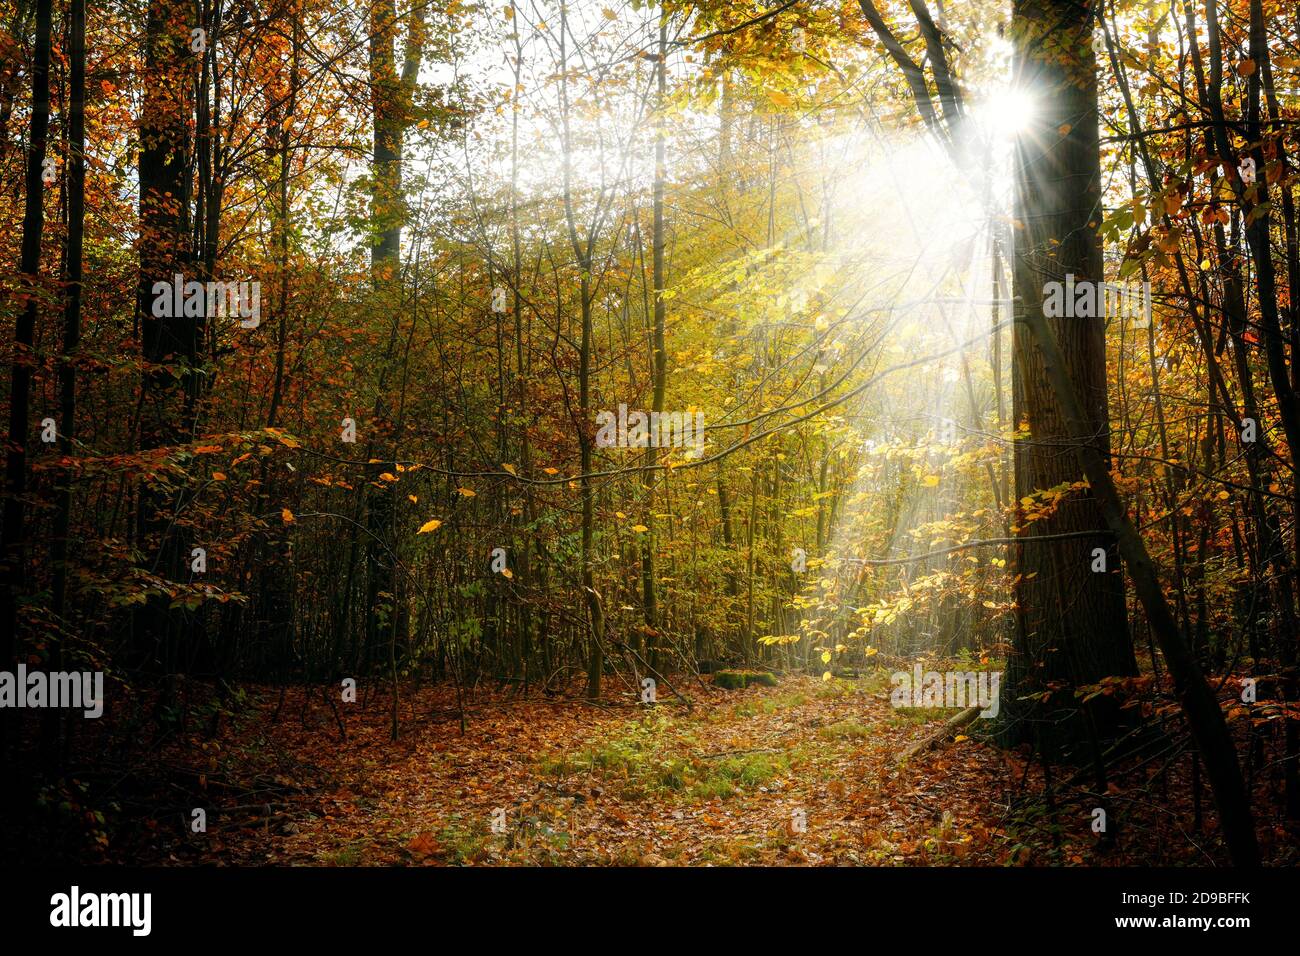 Autumn forest with colorful foliage and sunrays, seasonal landscape in the beautiful nature, selected focus Stock Photo